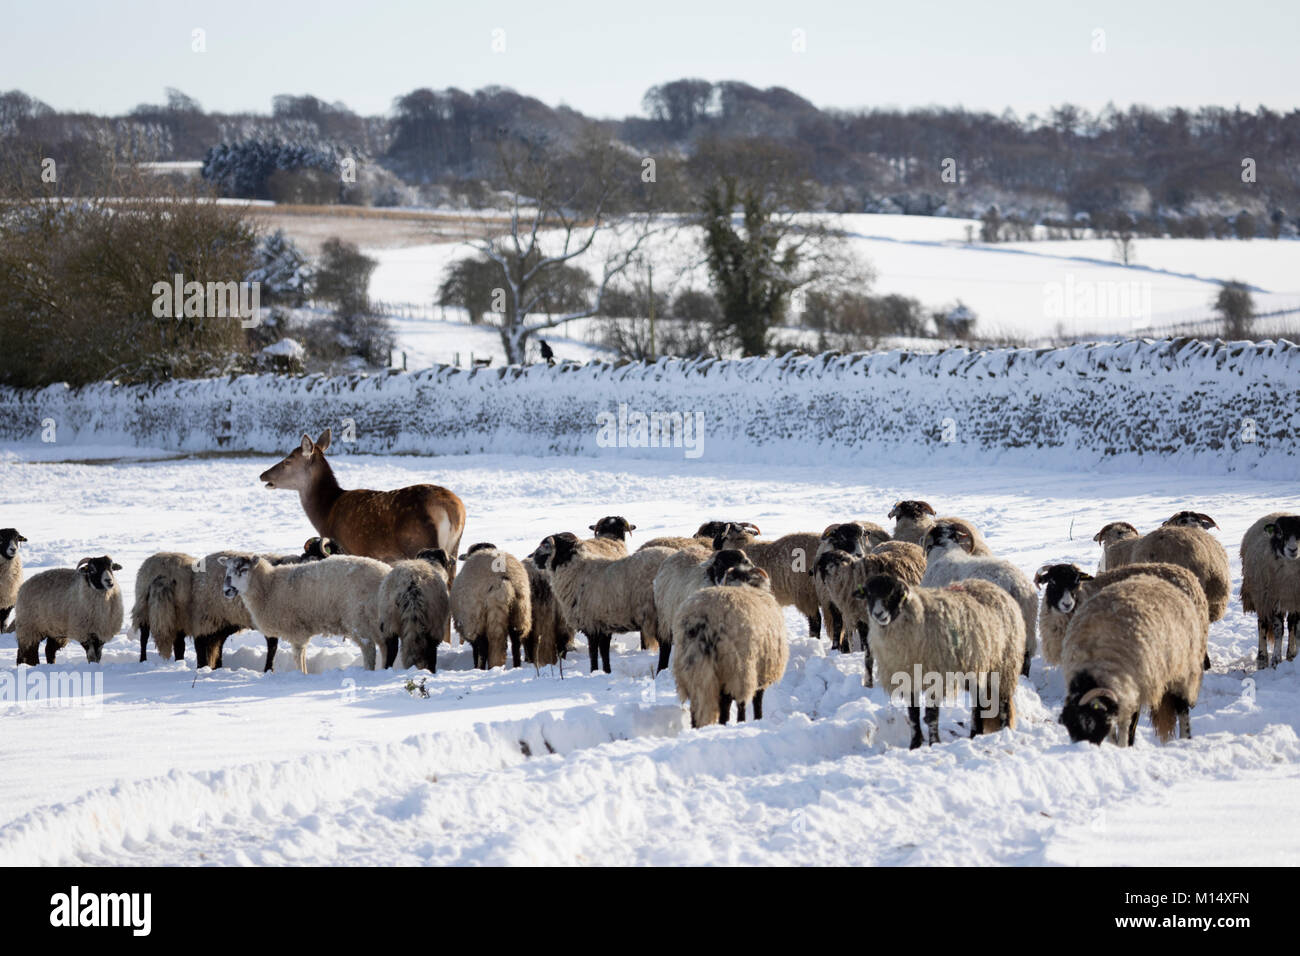 White sheep and deer in snow covered field, Broadway, The Cotswolds, Worcestershire, England, United Kingdom, Europe Stock Photo